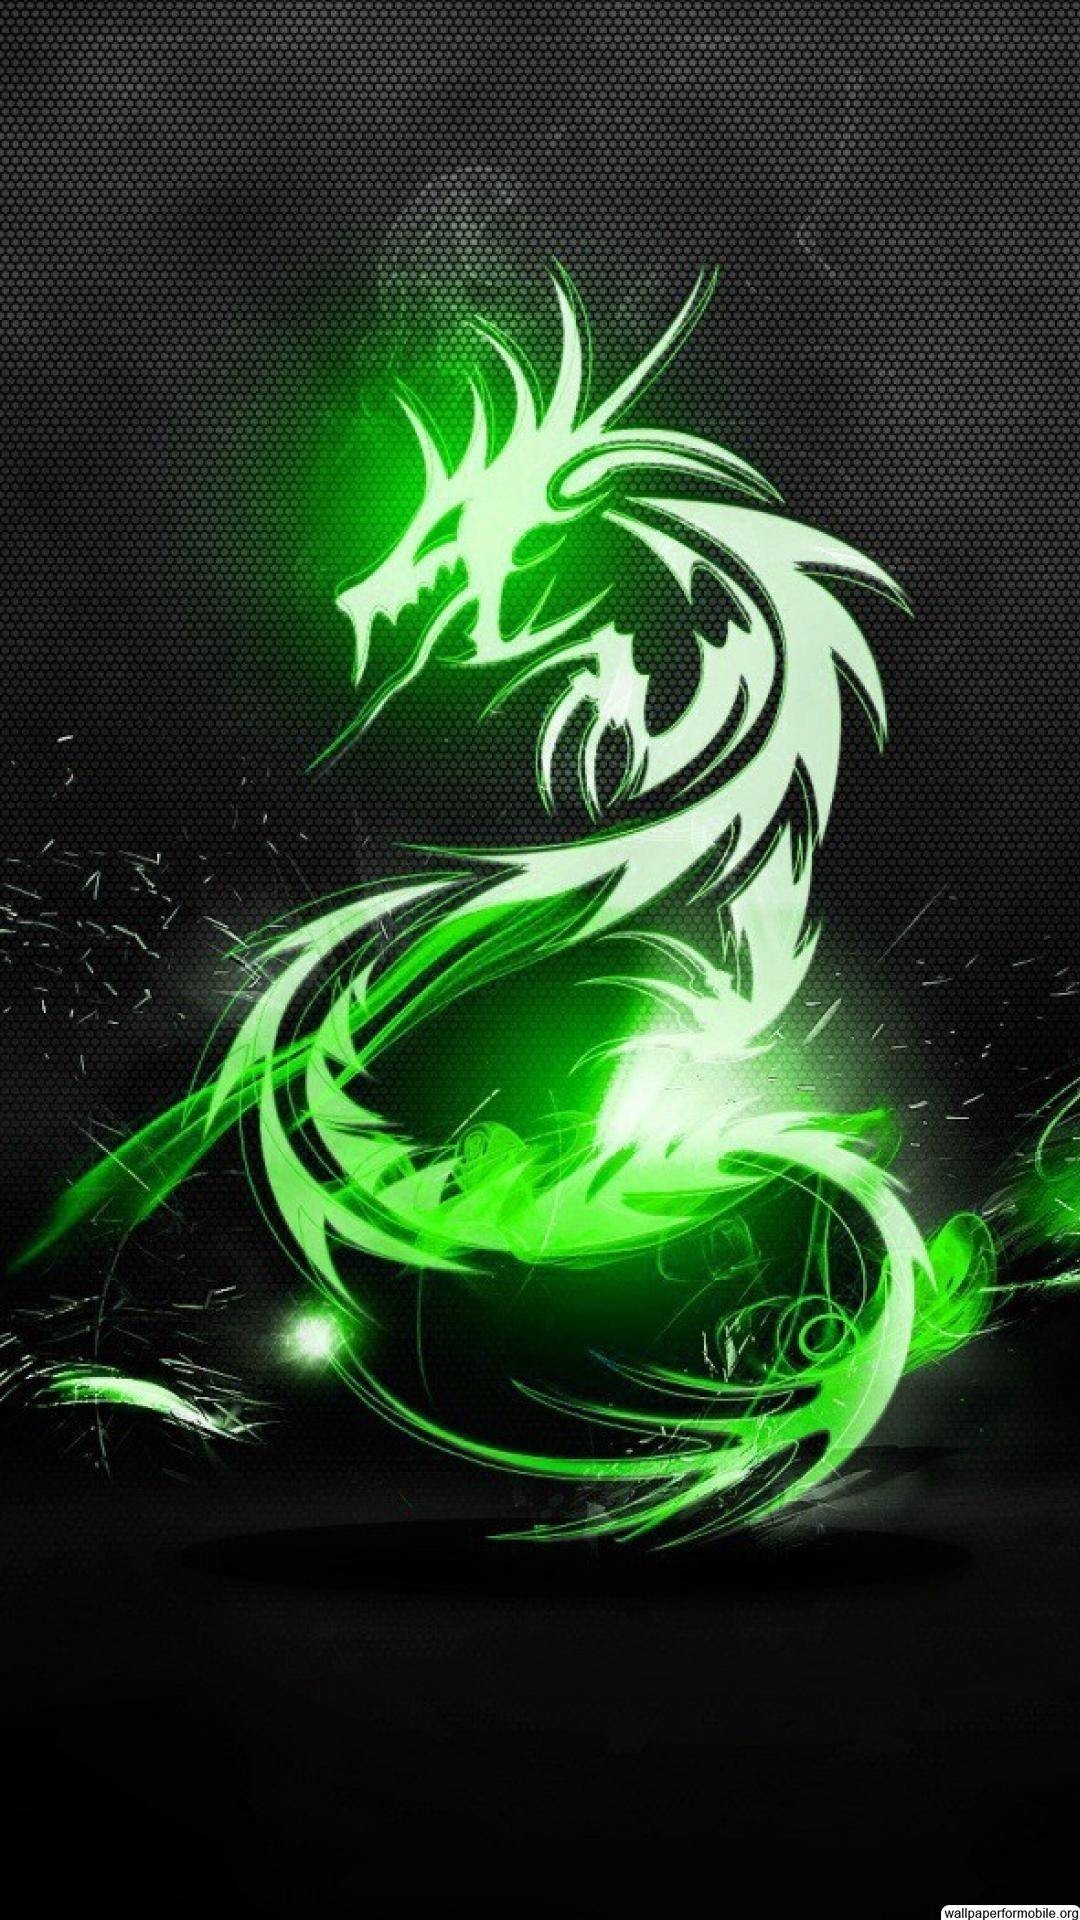 1080x1920  http://wallpaperformobile.org/7199/cool-dragon-wallpapers.